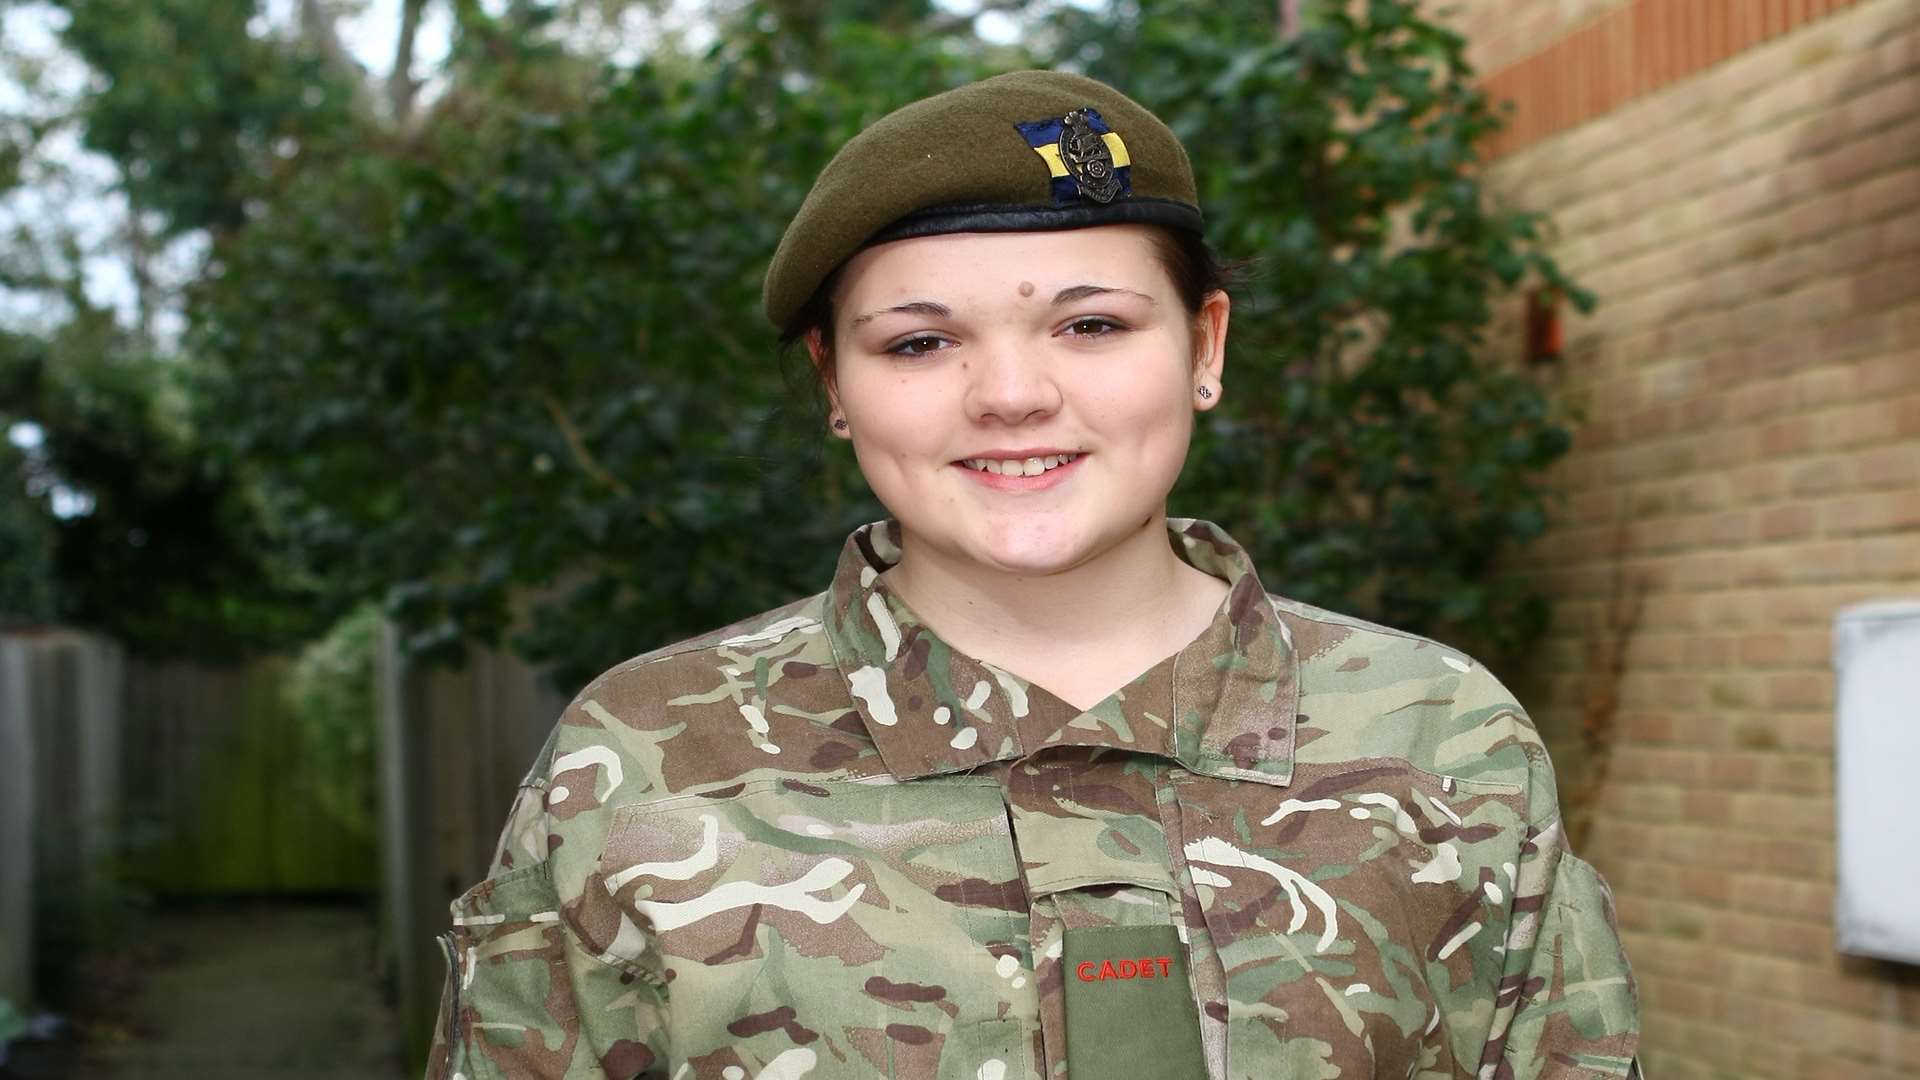 Hannah pictured in her army cadet uniform after the first incident